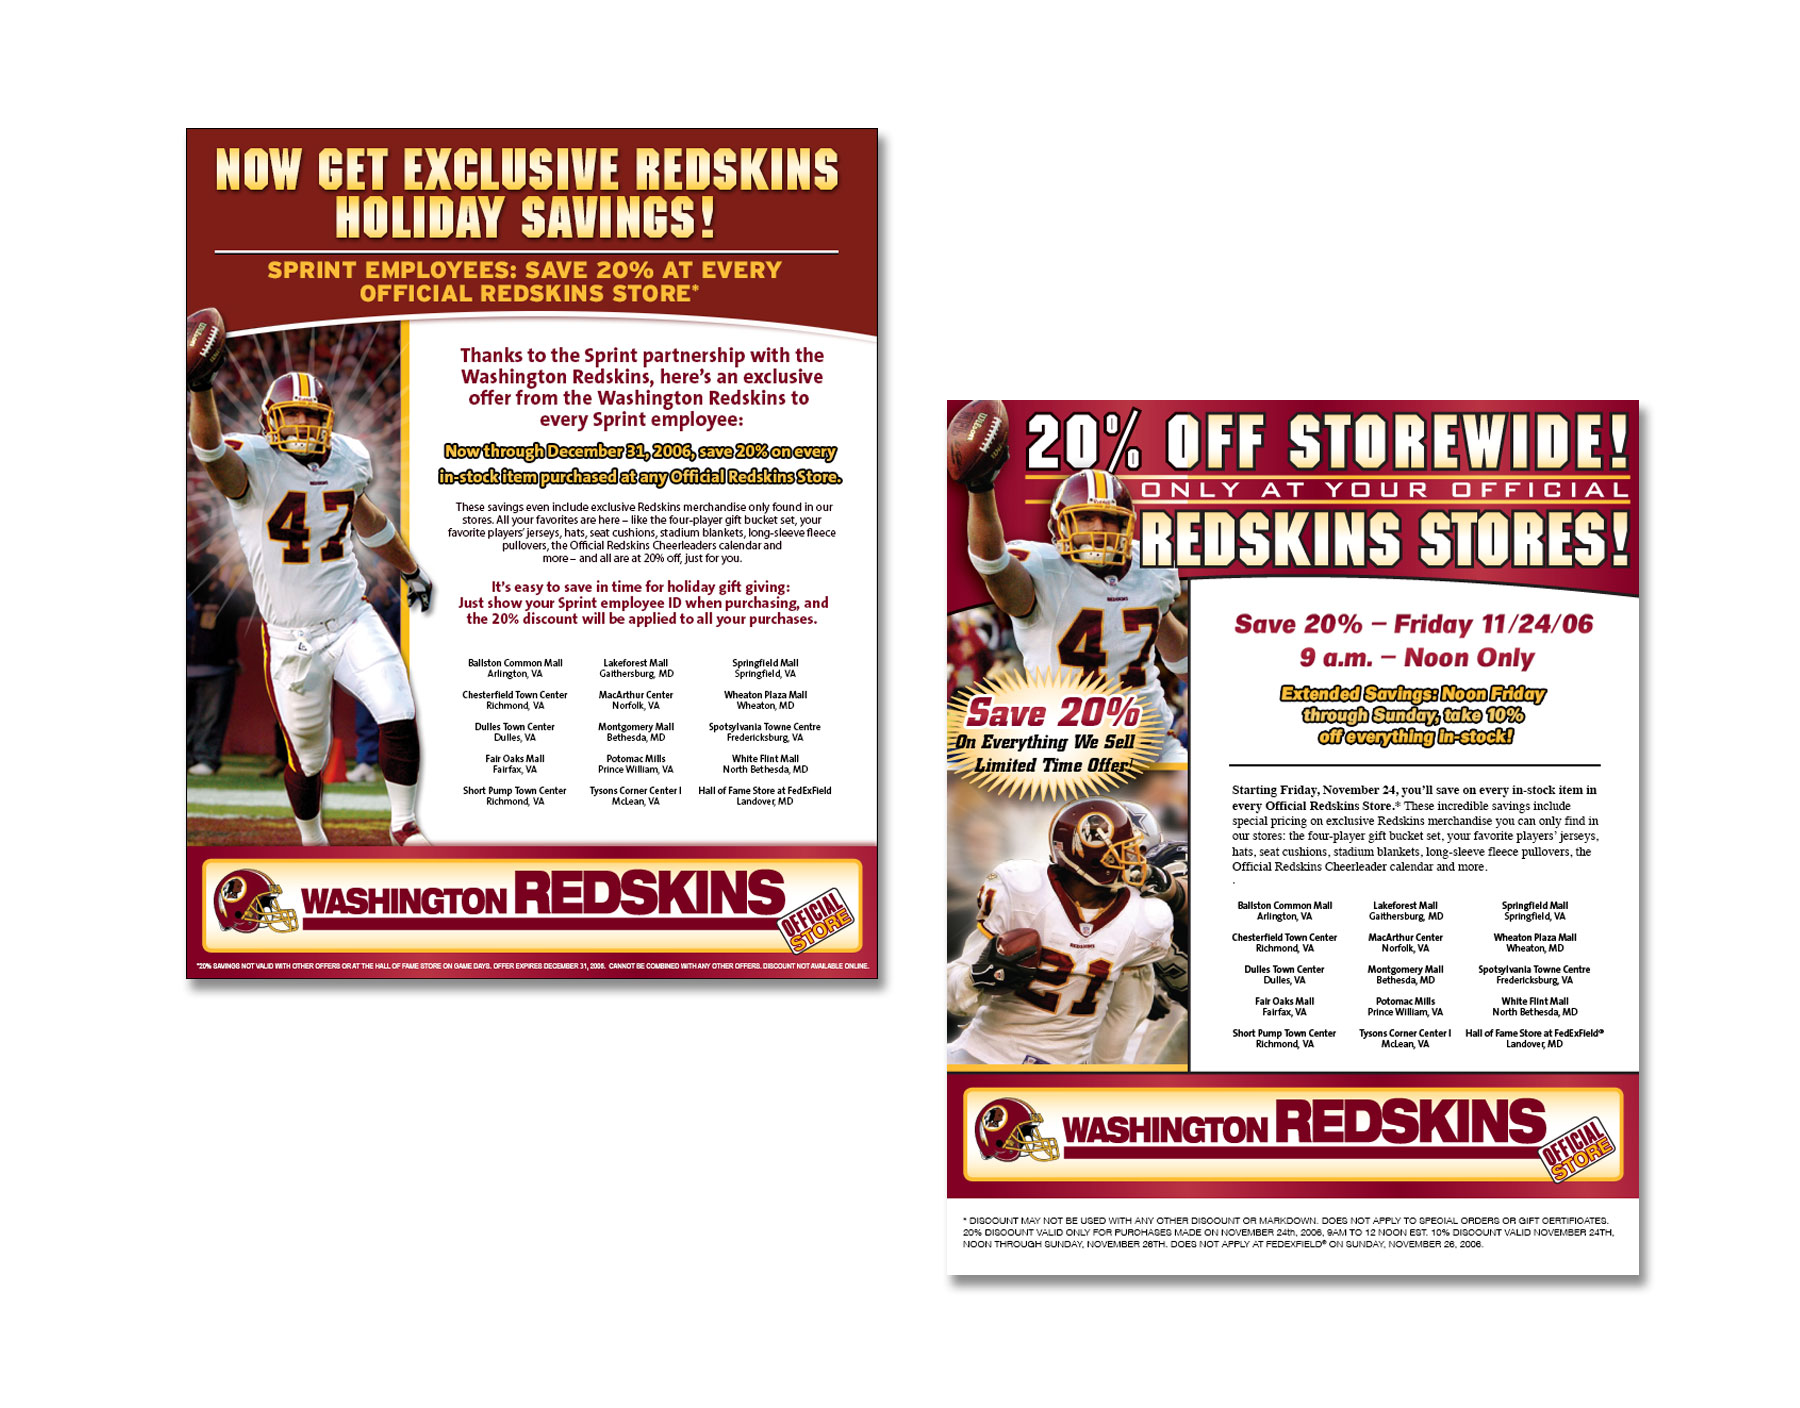 Washington Redskins Email Campaigns